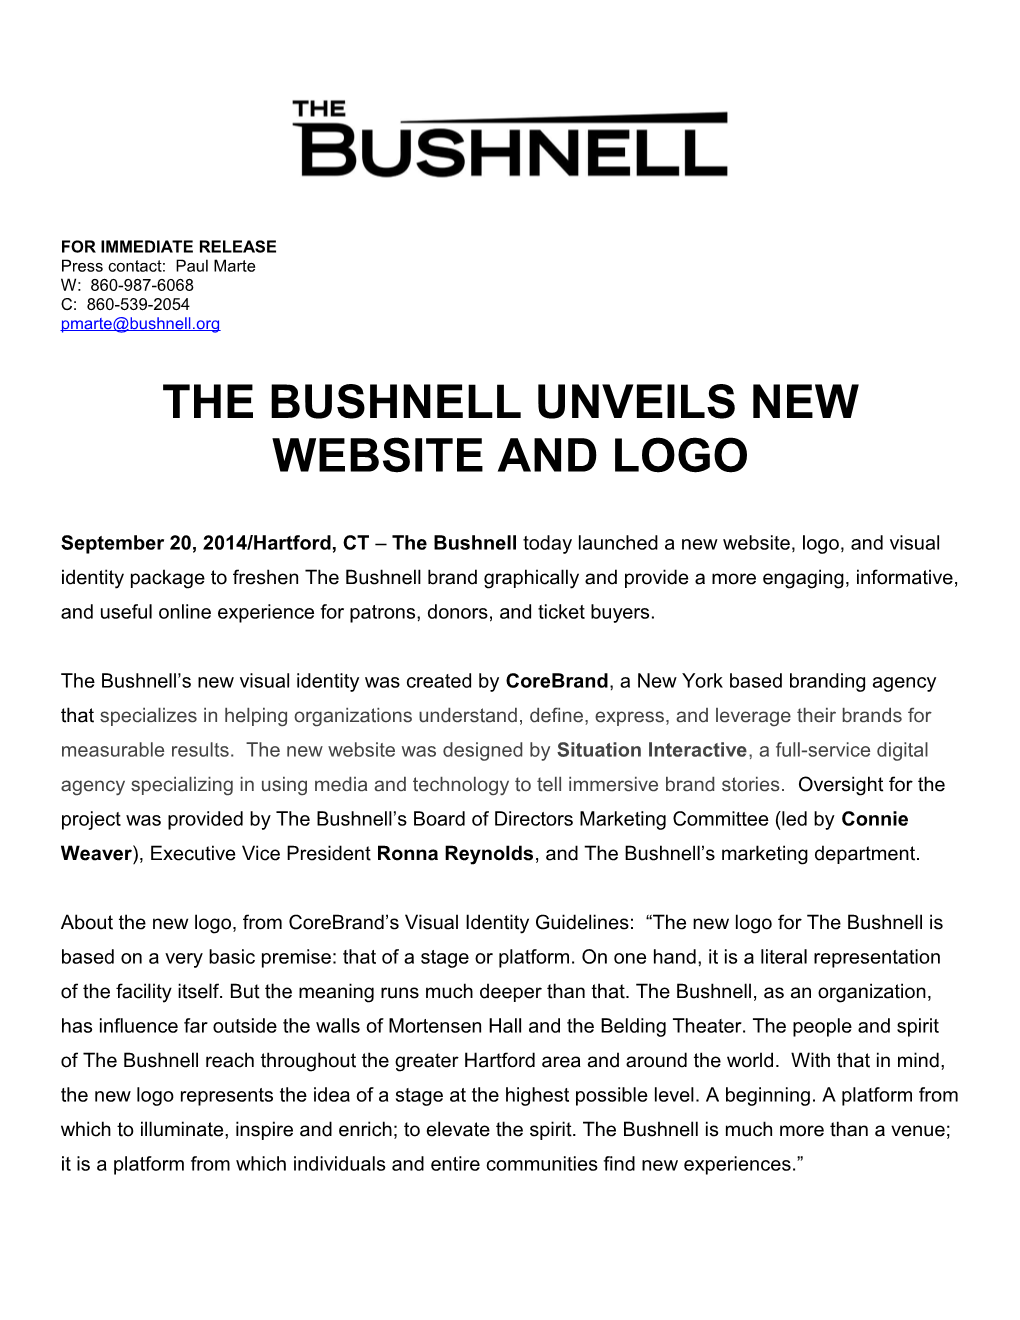 The Bushnell Unveils New Website and Logo